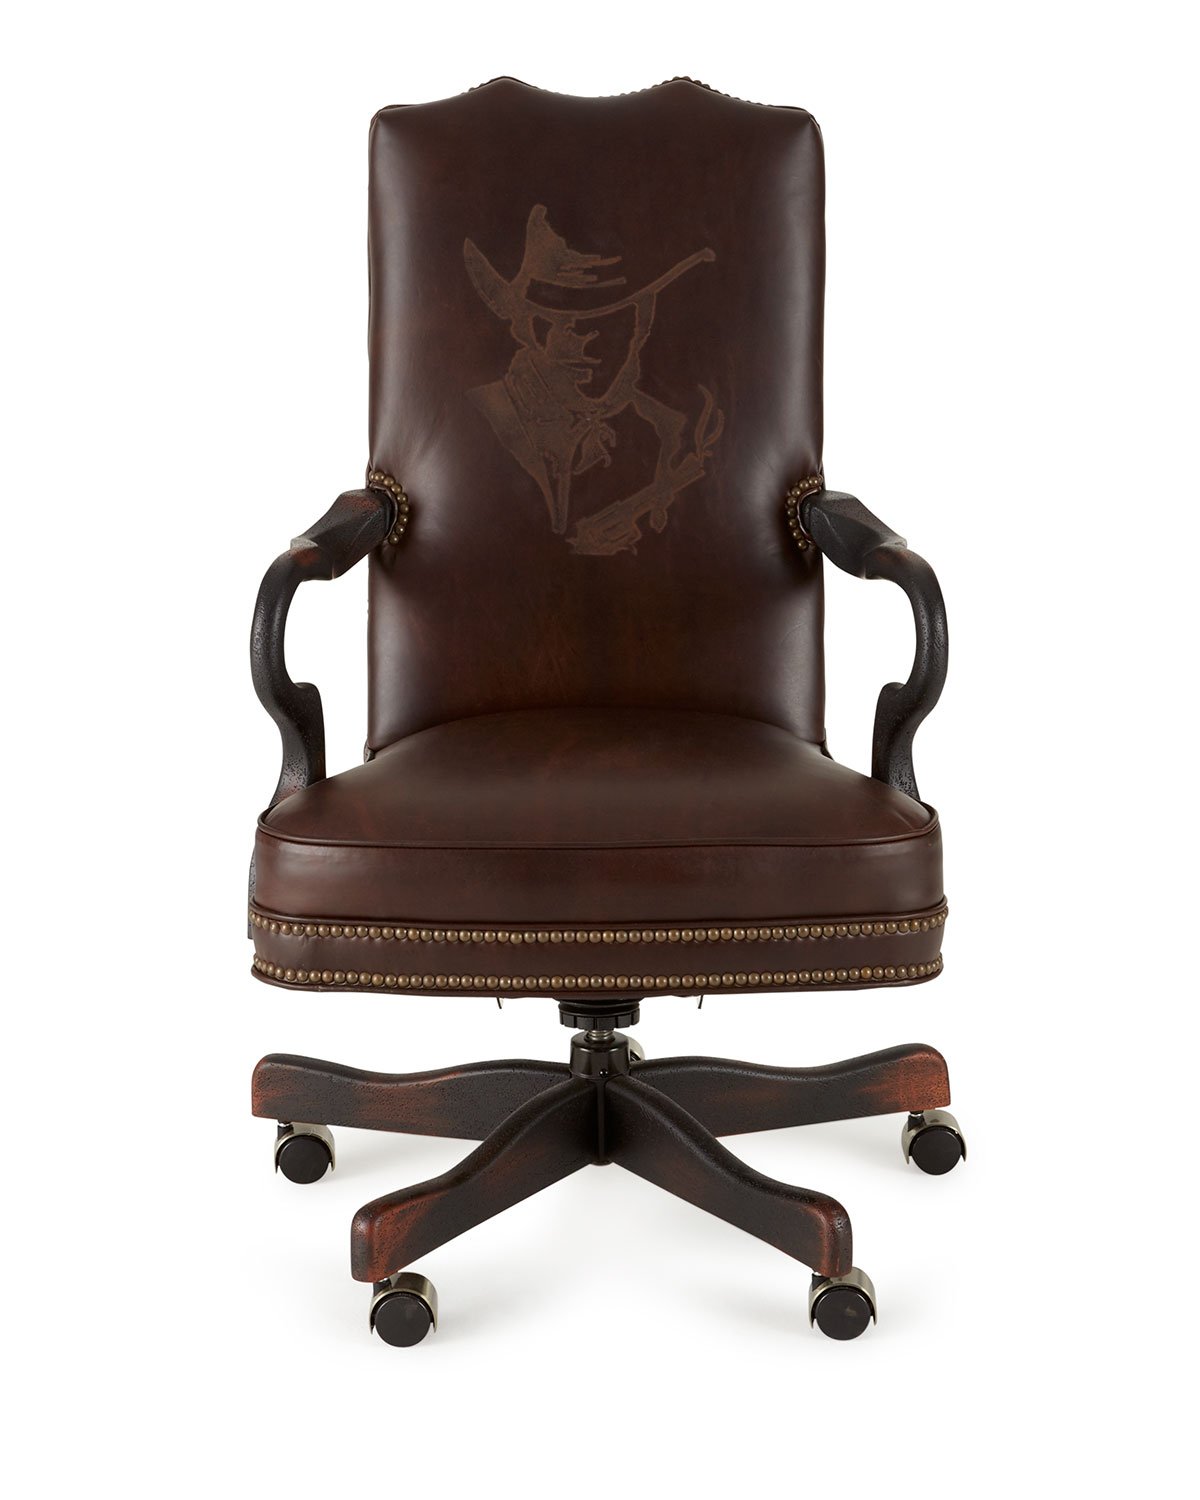 Clide Leather Office Chair in Sunslinger - Old Hickory Tannery